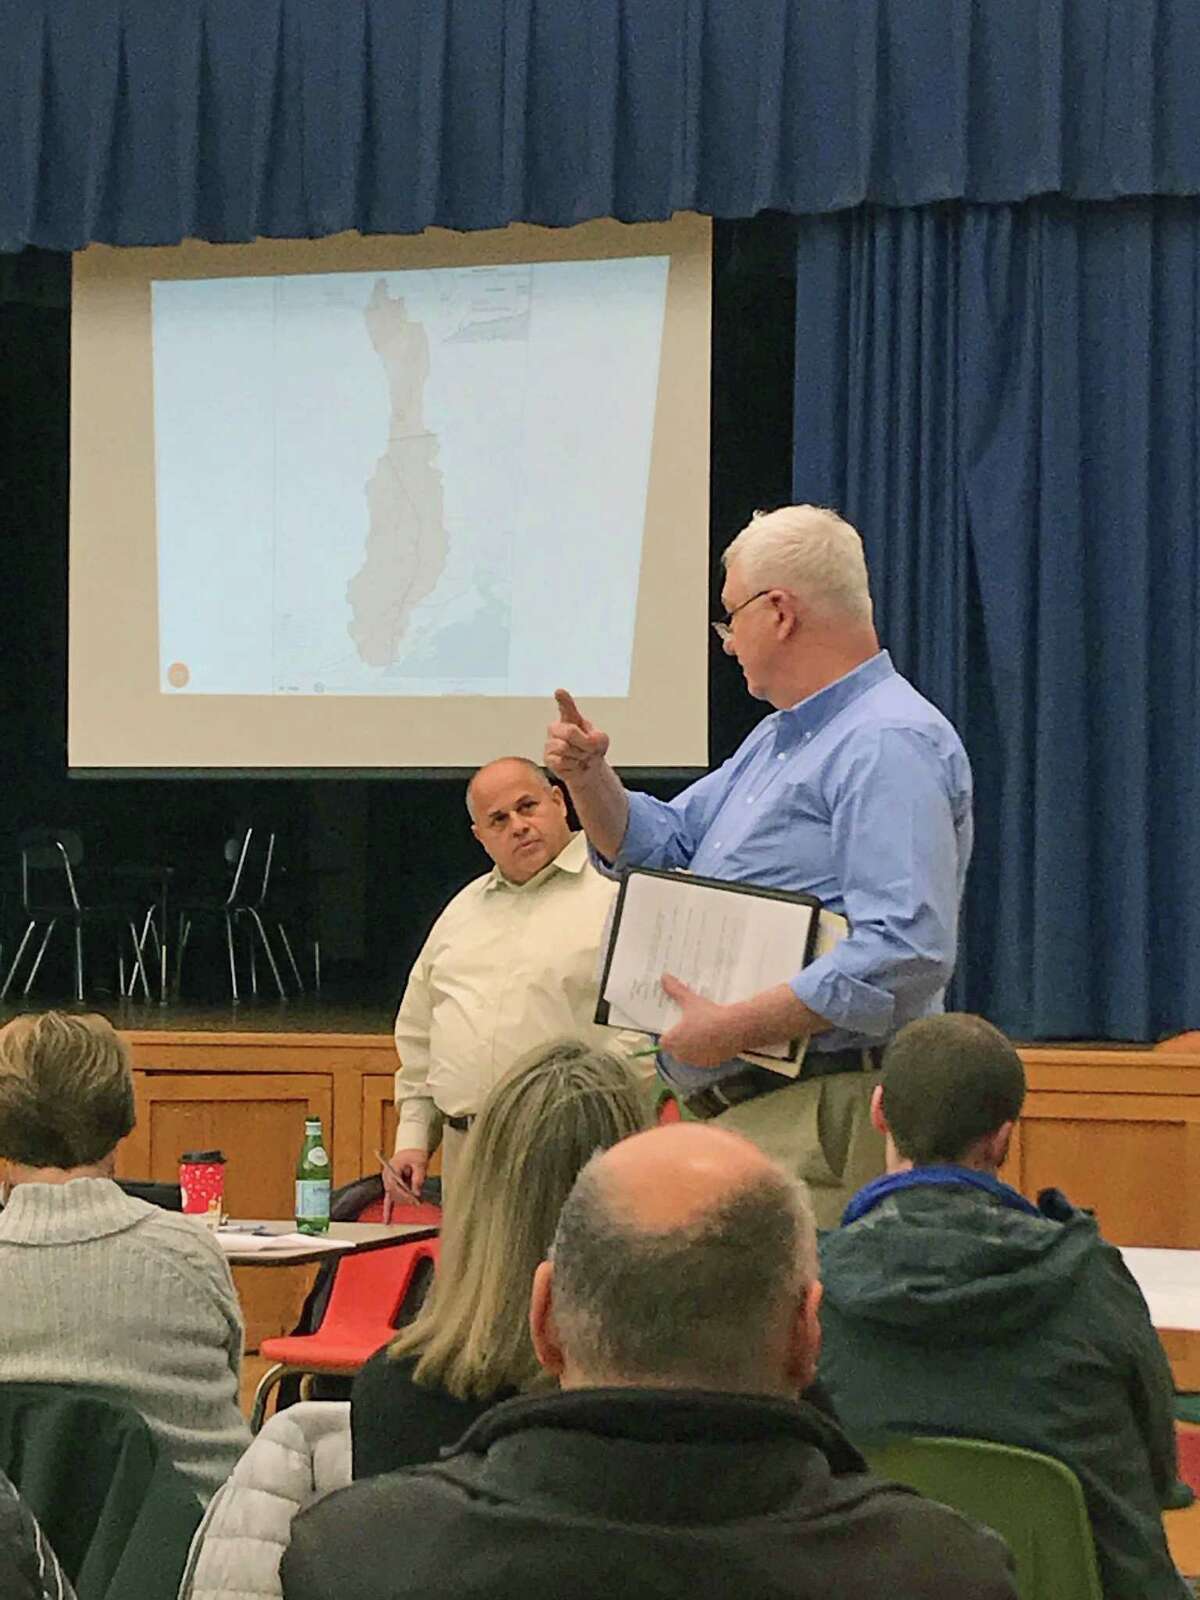 Keith Bradley, of Fairfield, explains struggles with flooding to Fairfield Director of Public Works Joseph Michelangelo at a meeting on Nov. 29, 2018, to discuss the Sept. 25, 2018, storm that flooding many Bridgeport and Fairfield, Conn., residents.